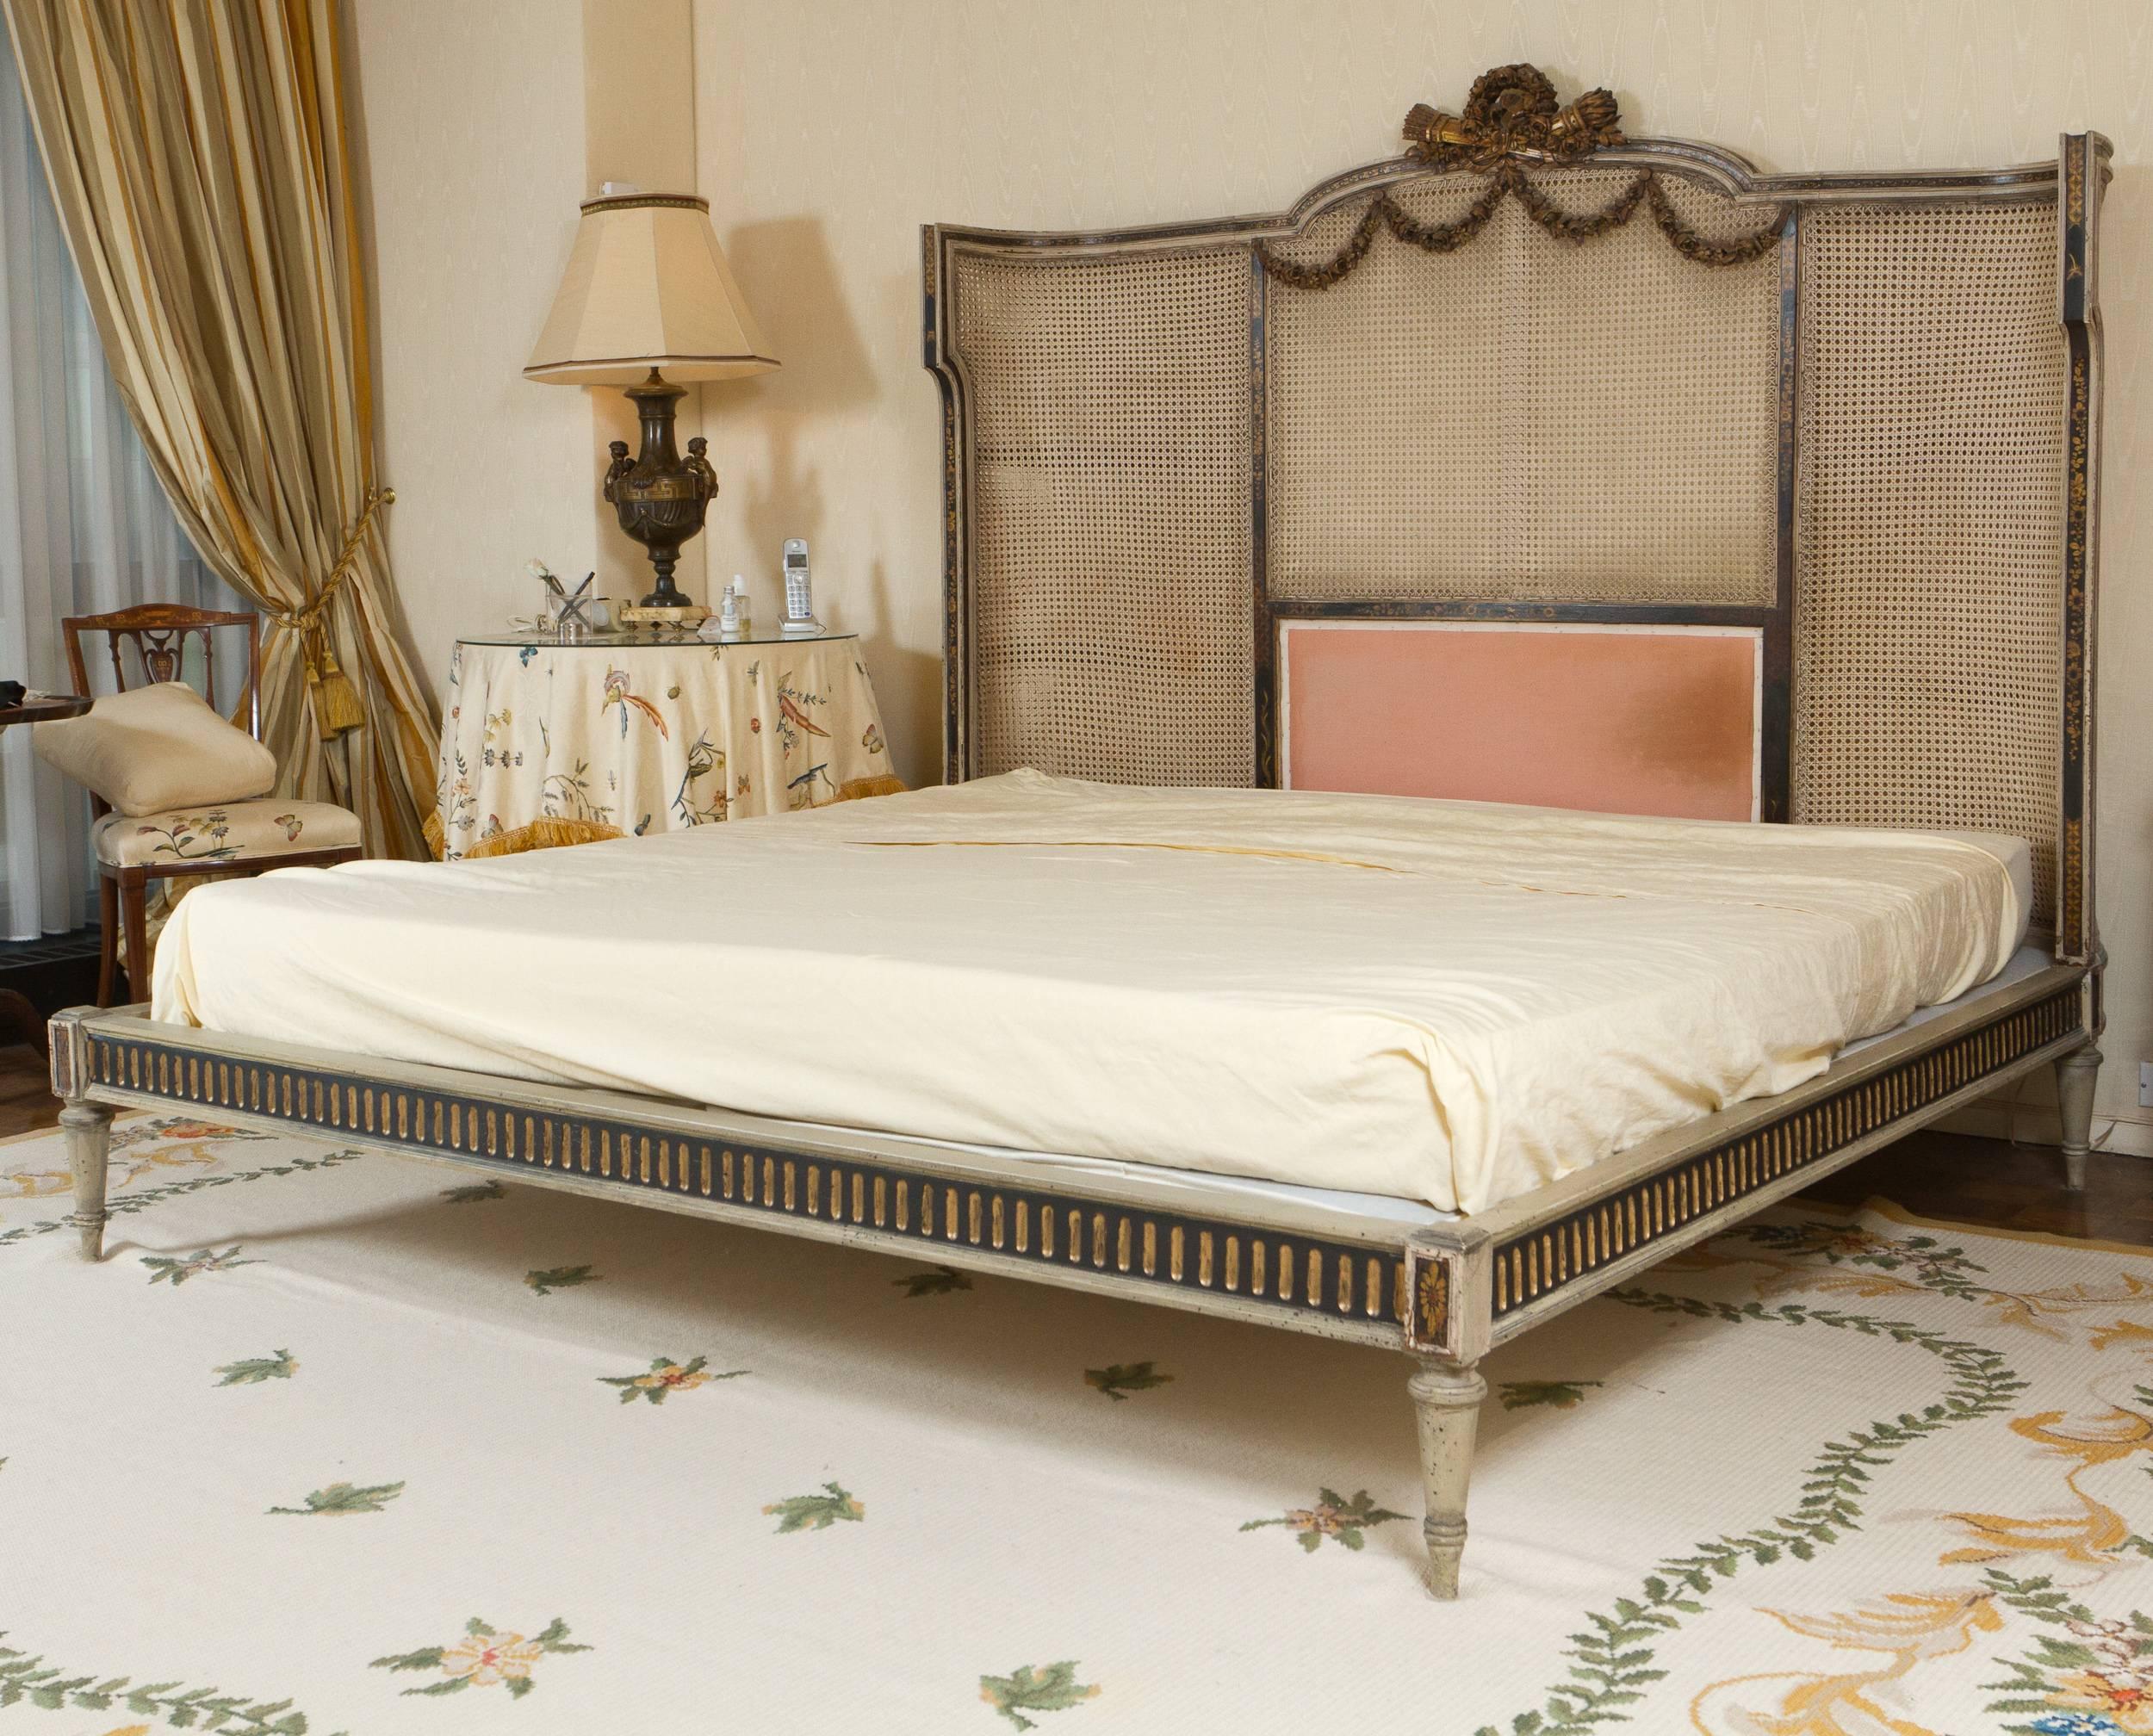 Louis XVI style painted and carved wood king-size bed. The backboard finished with cane-work.

Dimensions: from floor to railing 9.5 inches
                     from floor  to base of mattress 14 inches